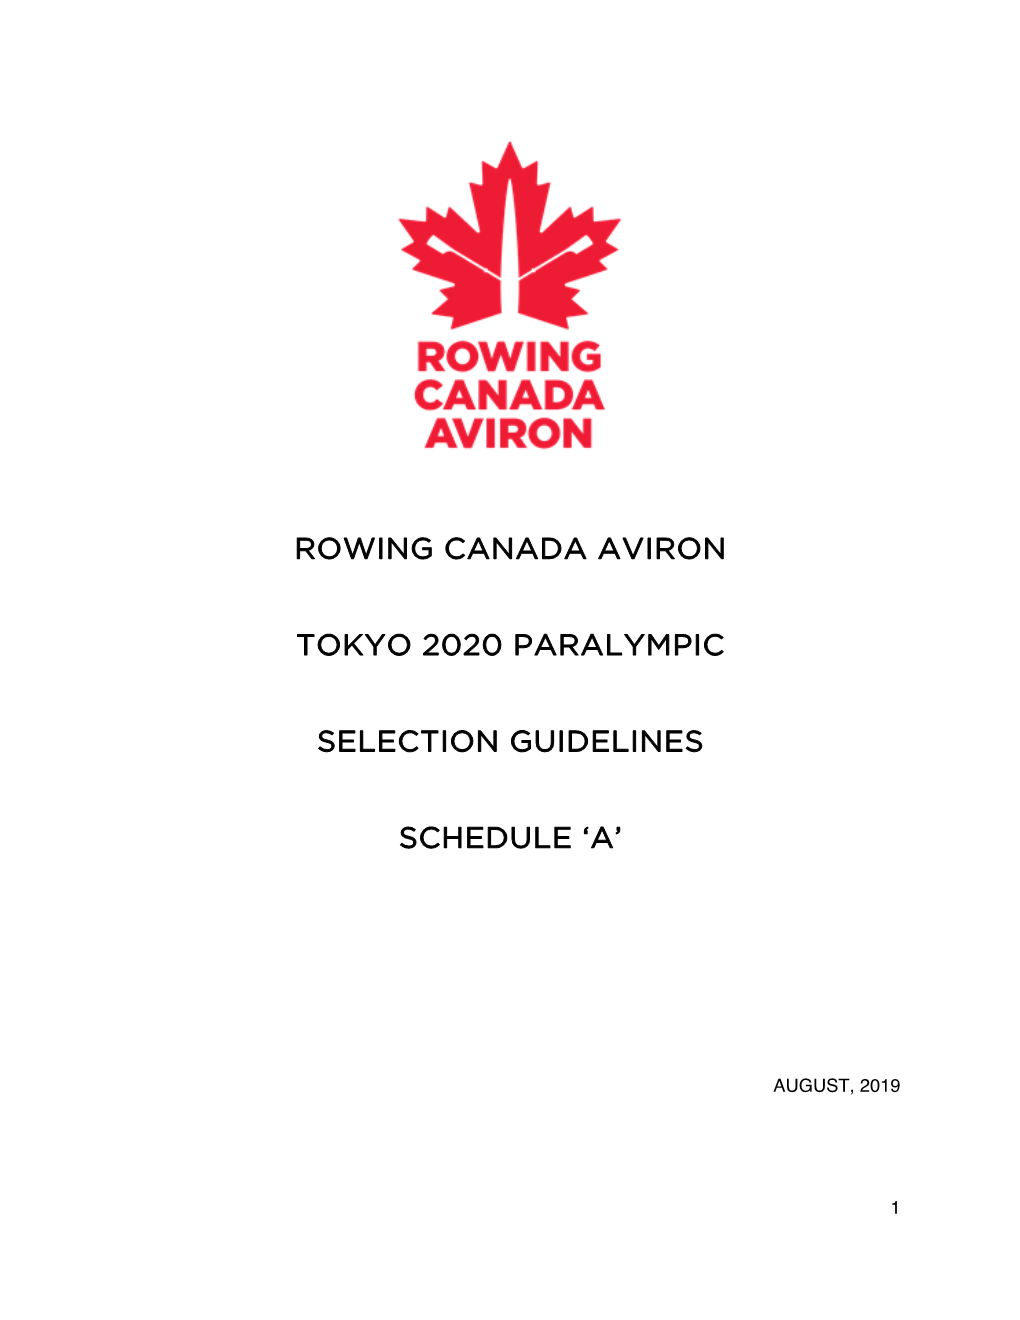 Rowing Canada Aviron Tokyo 2020 Paralympic Selection Guidelines